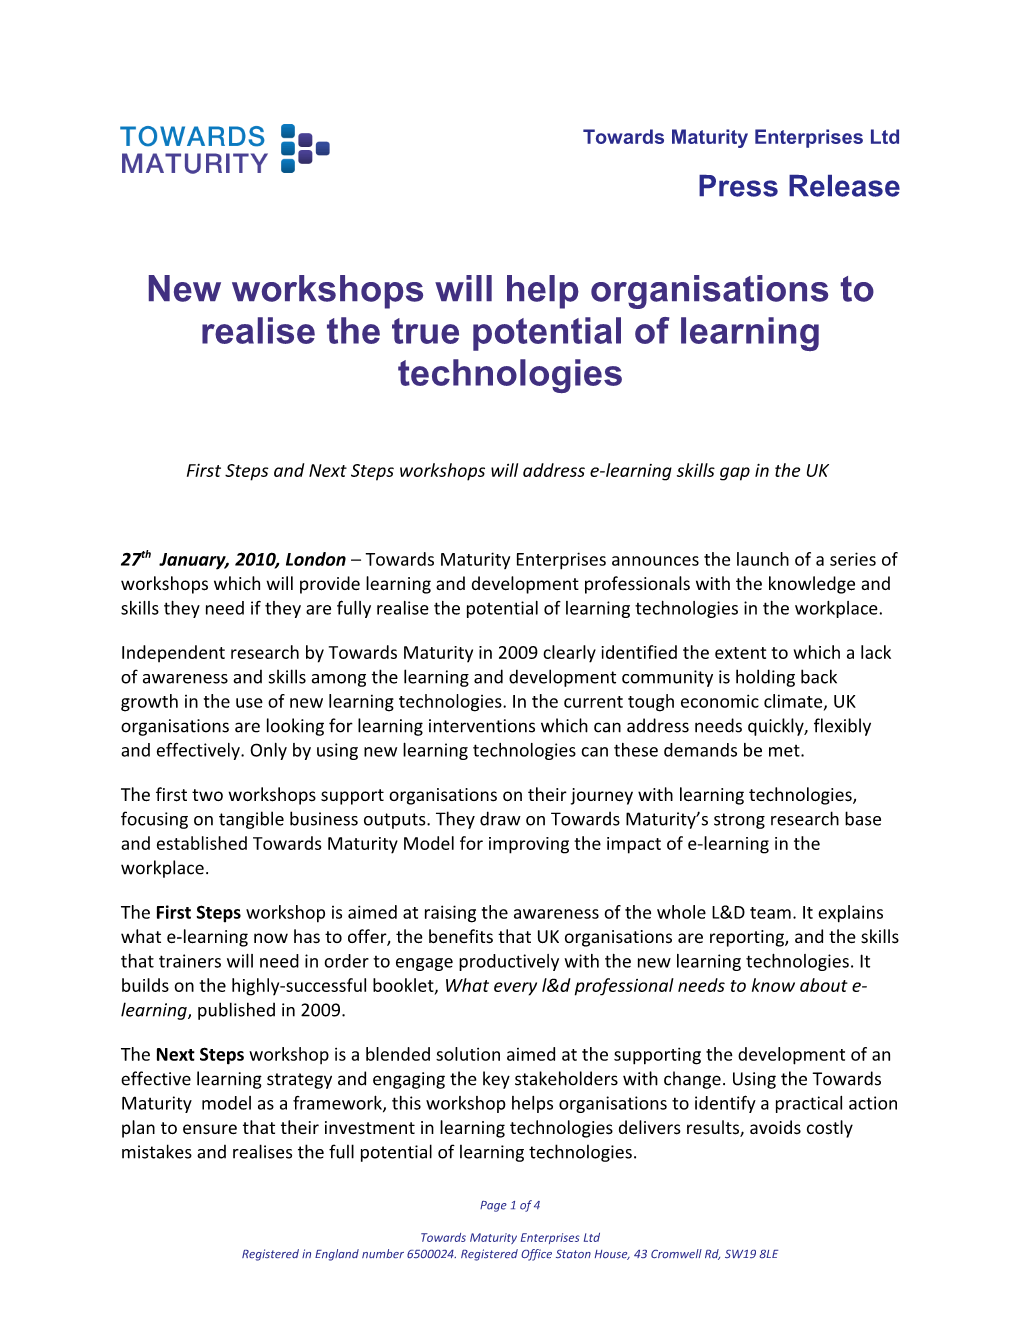 New Workshops Will Help Organisations to Realise the True Potential of Learning Technologies